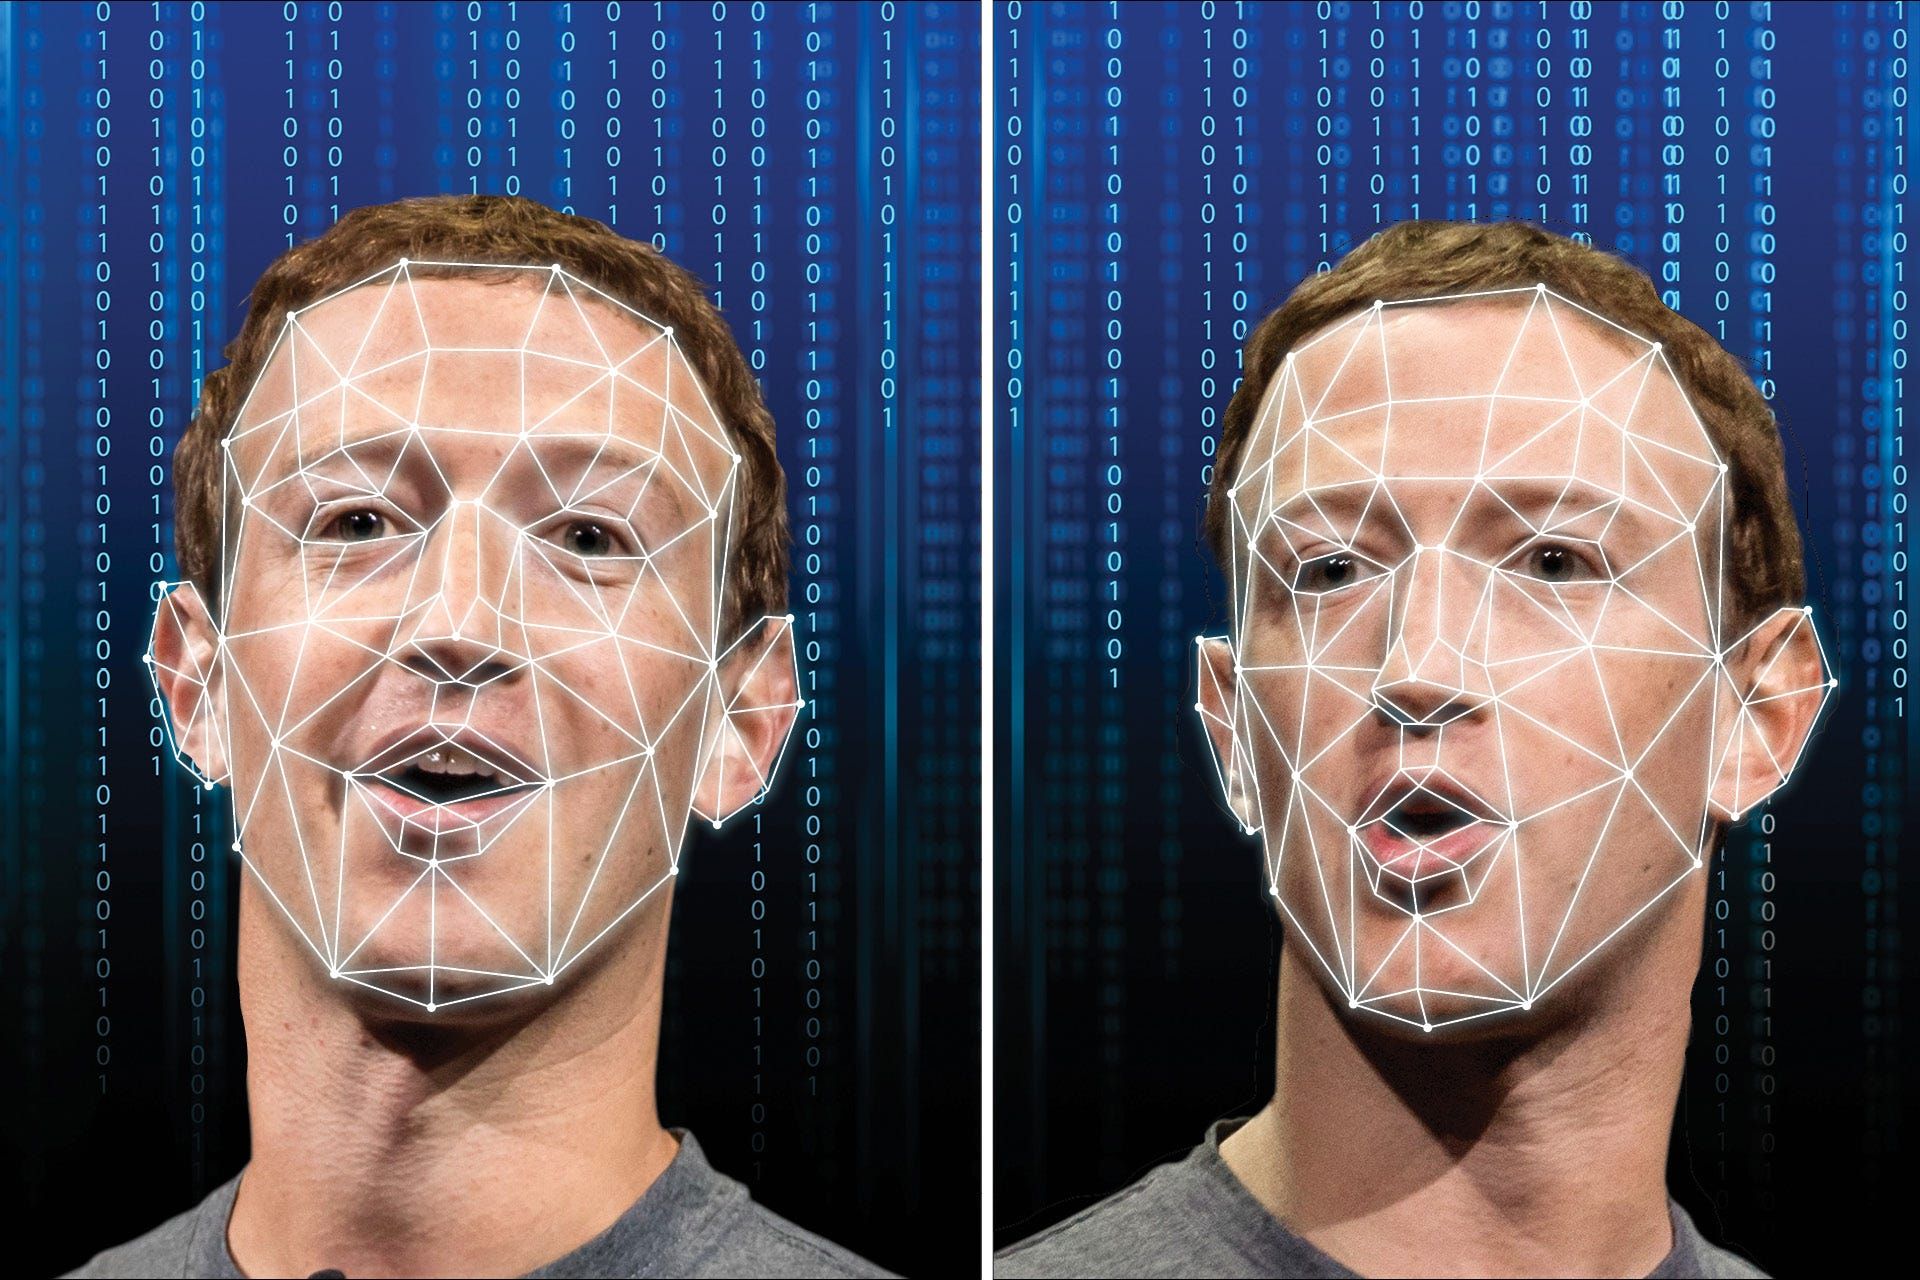 What are deepfakes?